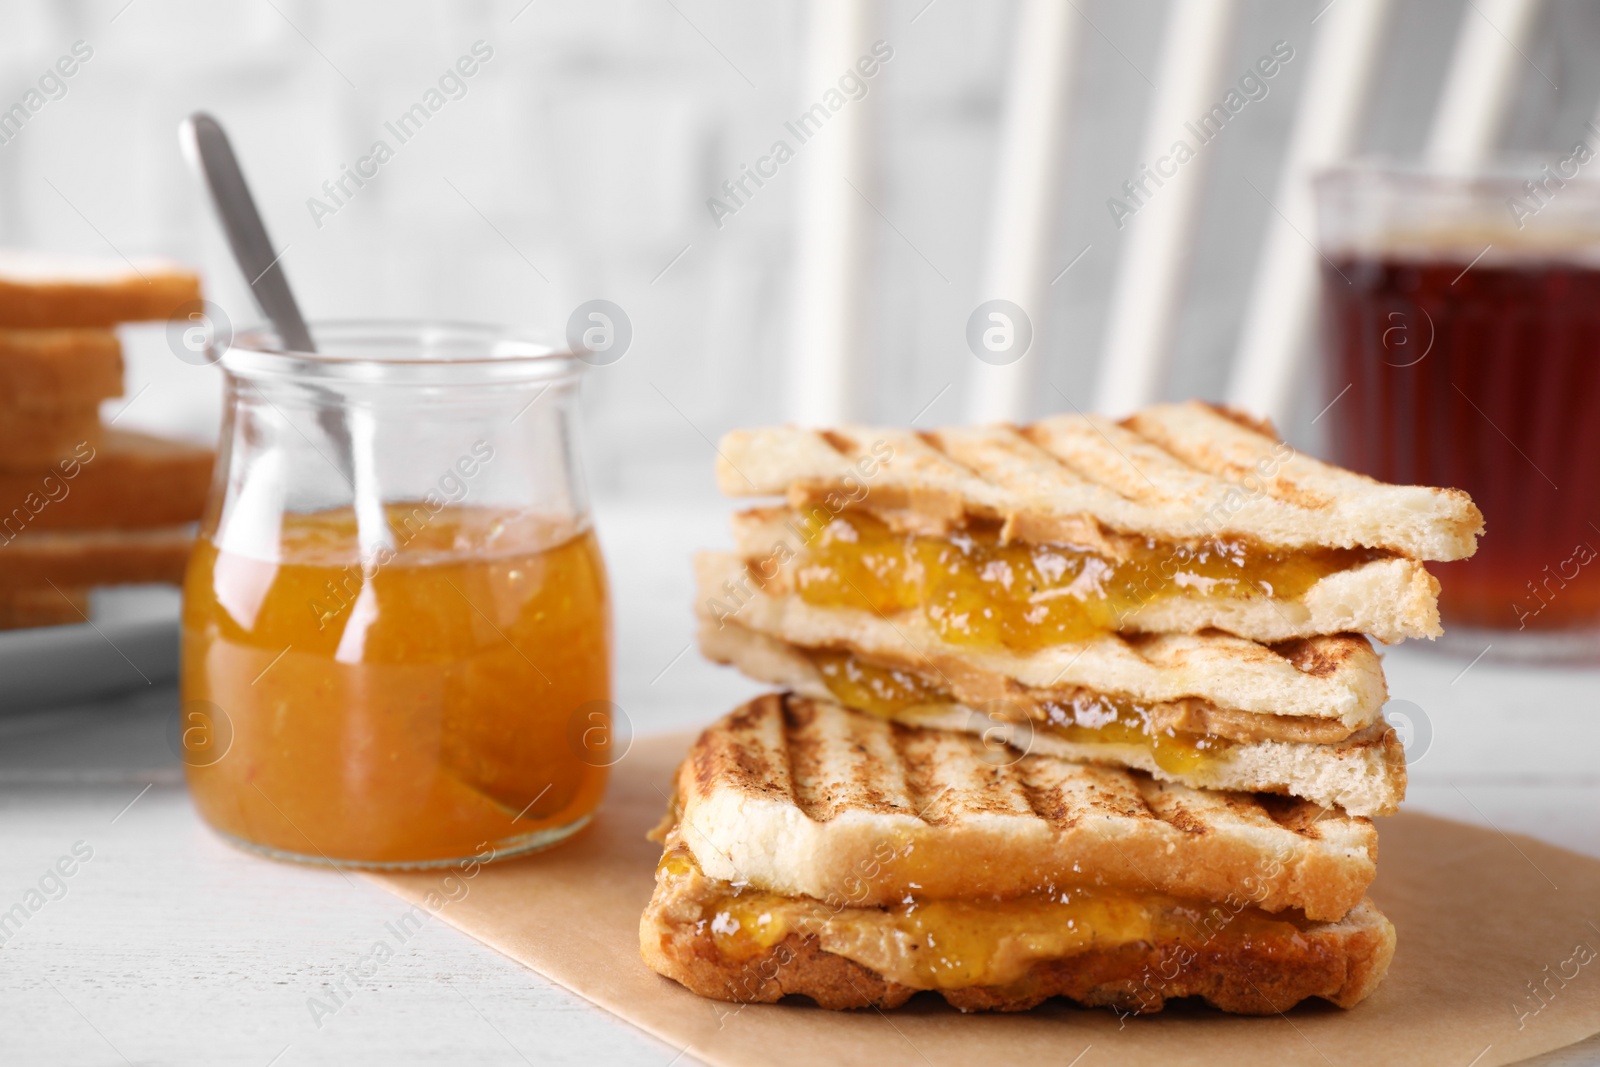 Image of Tasty sandwiches with apricot jam and peanut butter for breakfast on white table